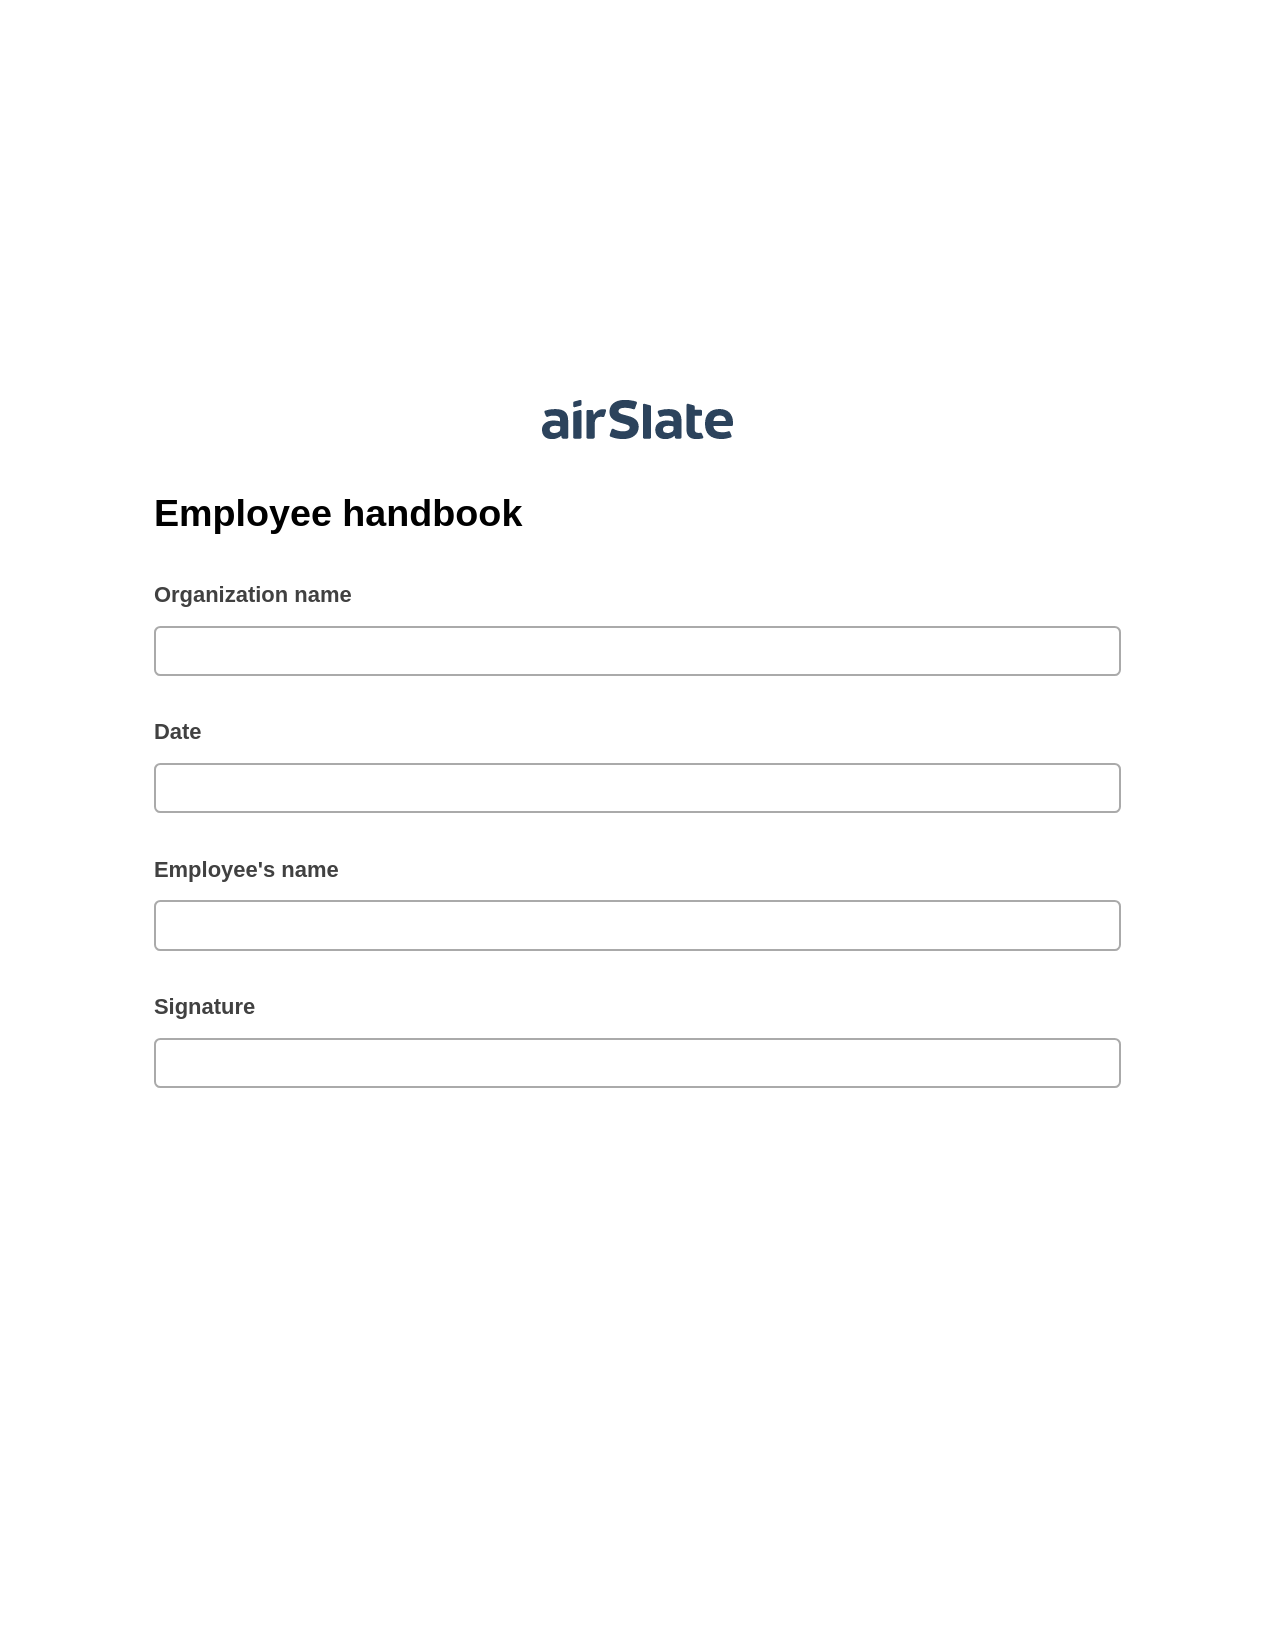 Employee handbook Pre-fill Dropdown from Airtable, Slack Notification Bot, Post-finish Document Bot